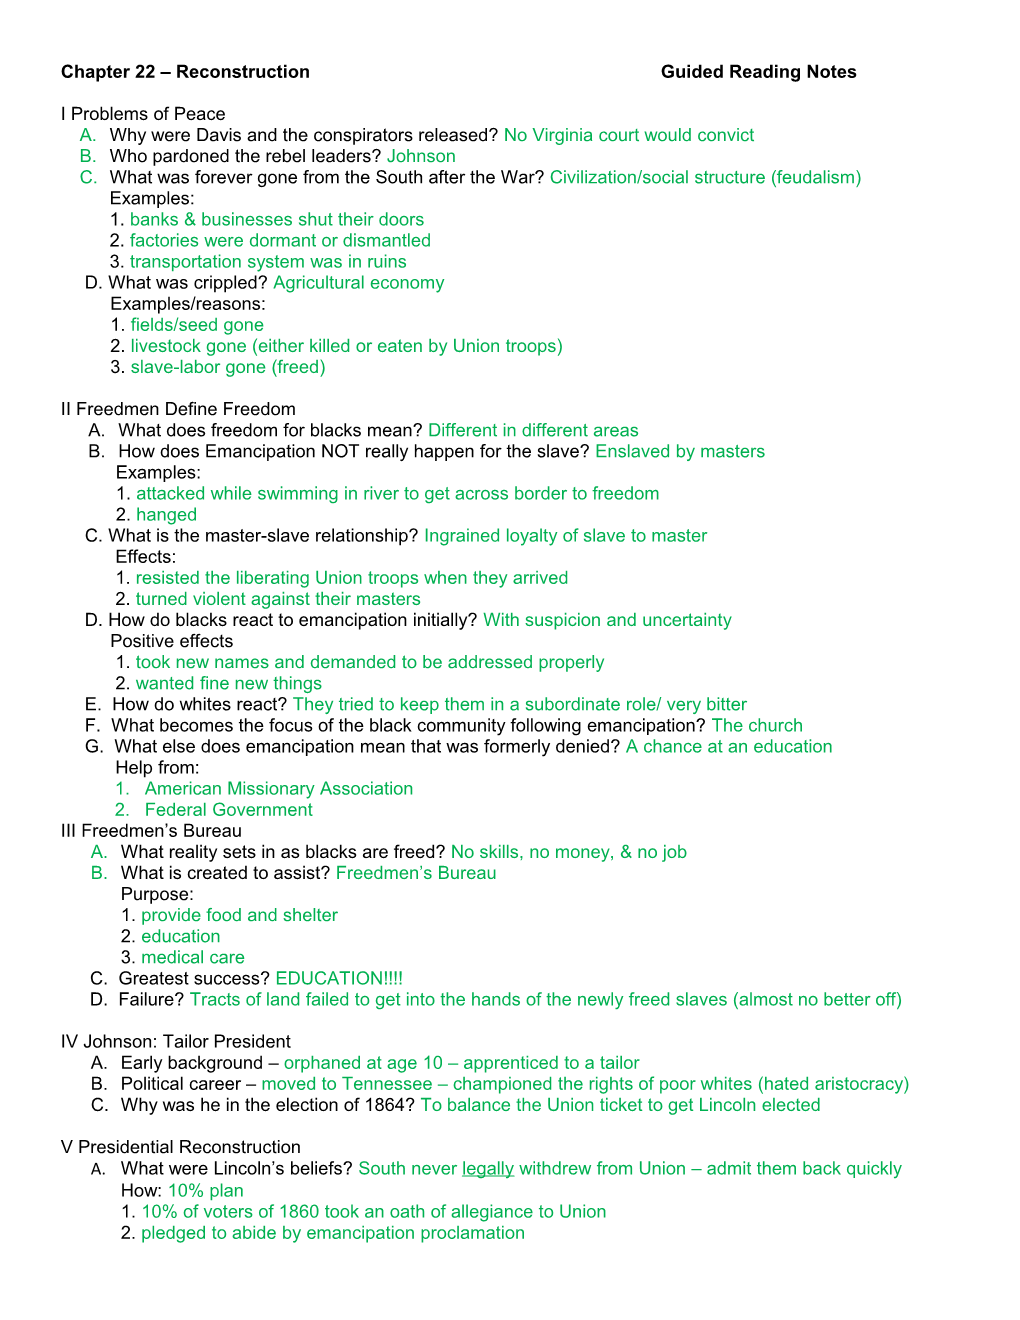 Chapter 22 Reconstructionguided Reading Notes